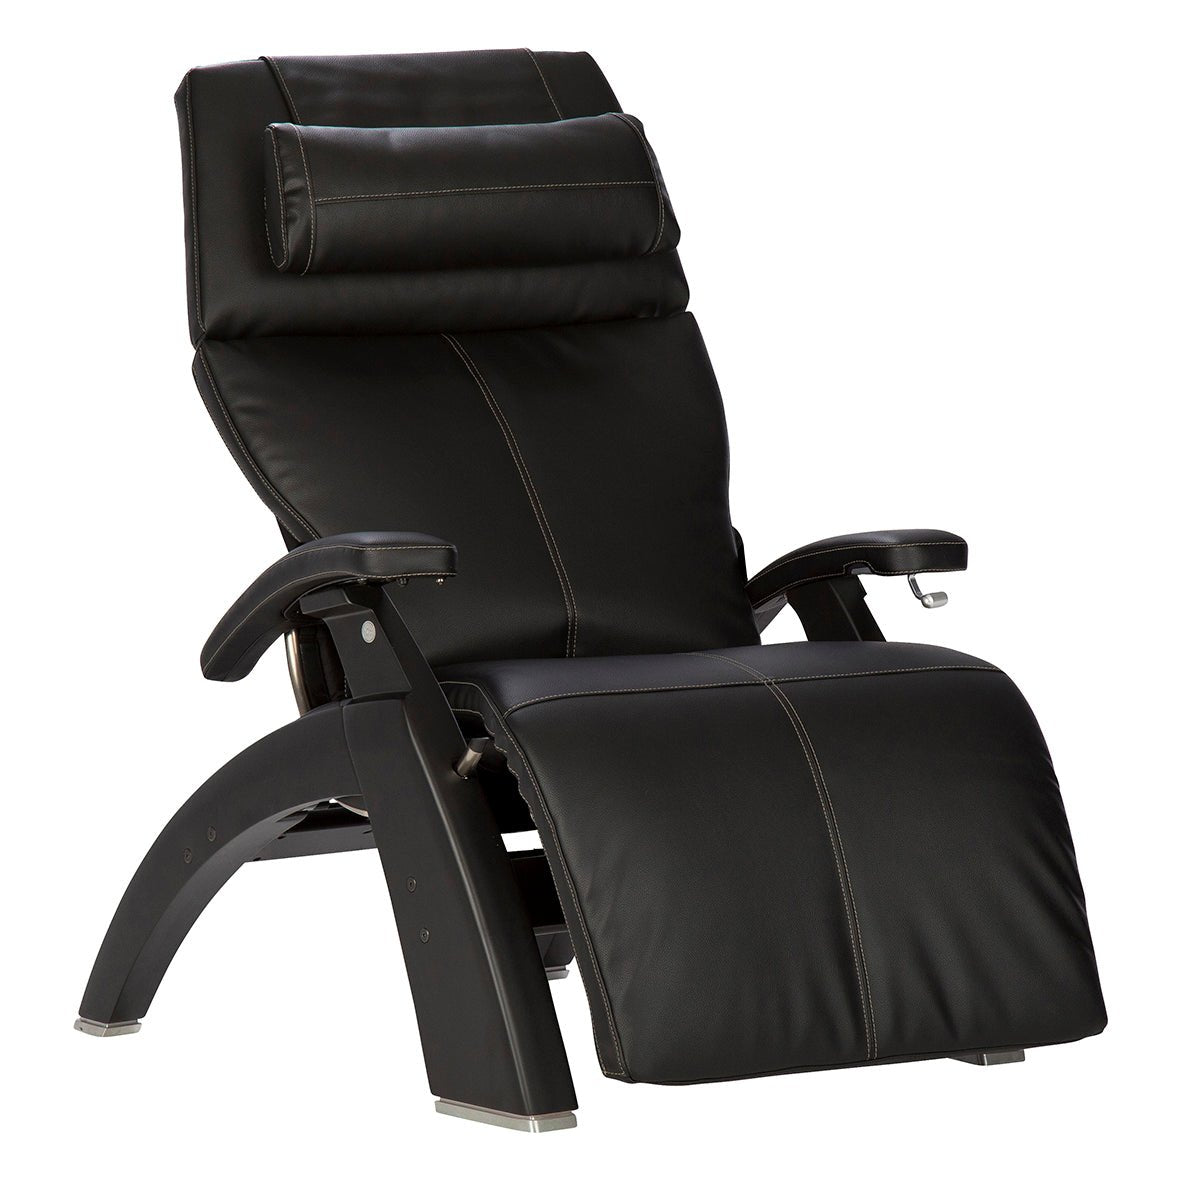 Human TouchArm Chairs, Recliners & Sleeper ChairsHuman Touch Perfect Chair PC-420 Zero Gravity ReclinerBlack SofHyde (Synthetic Leather)Massage Chair Heaven